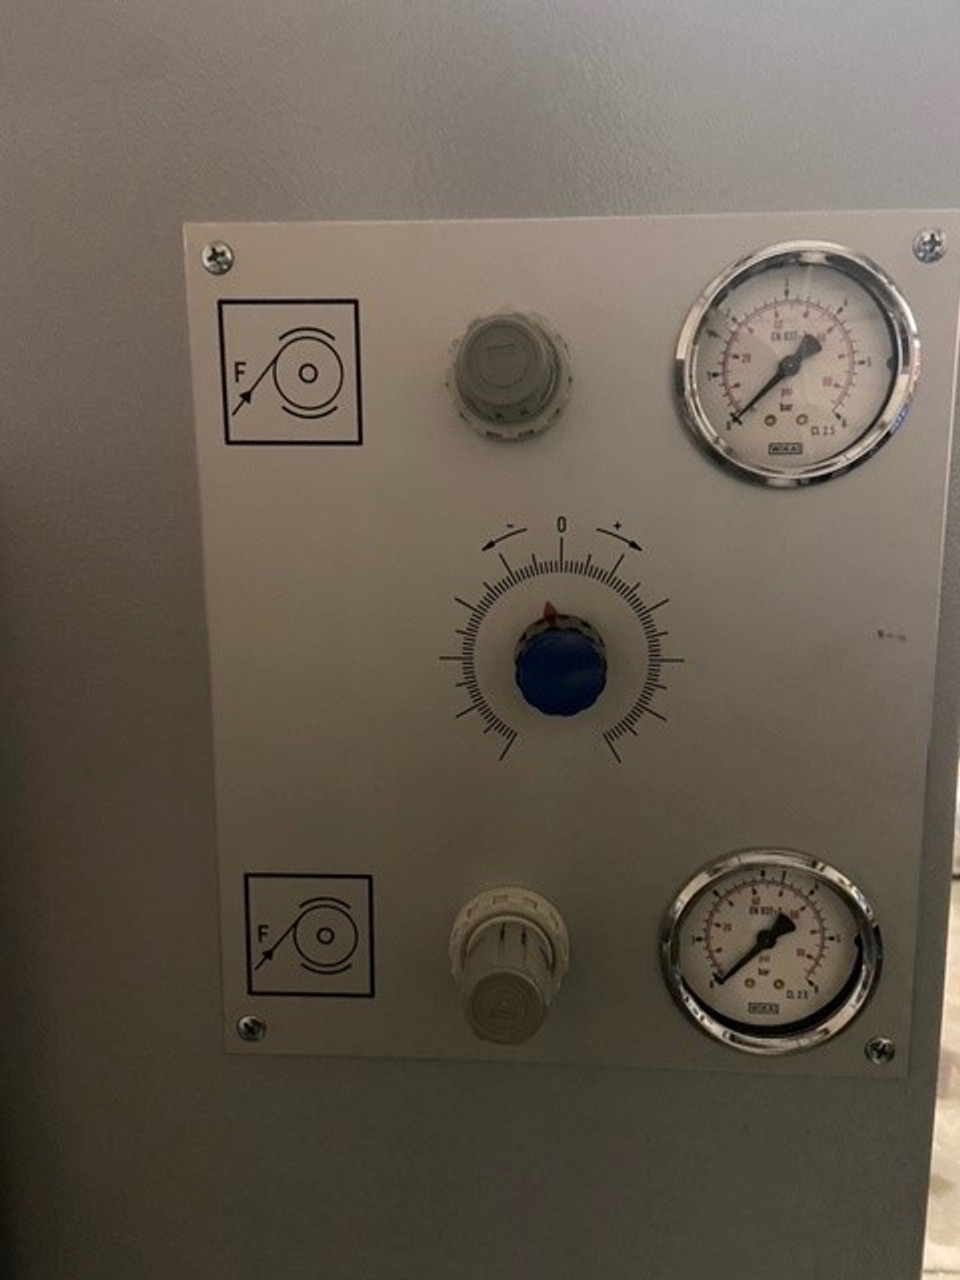 Operator Panel for Tension Control